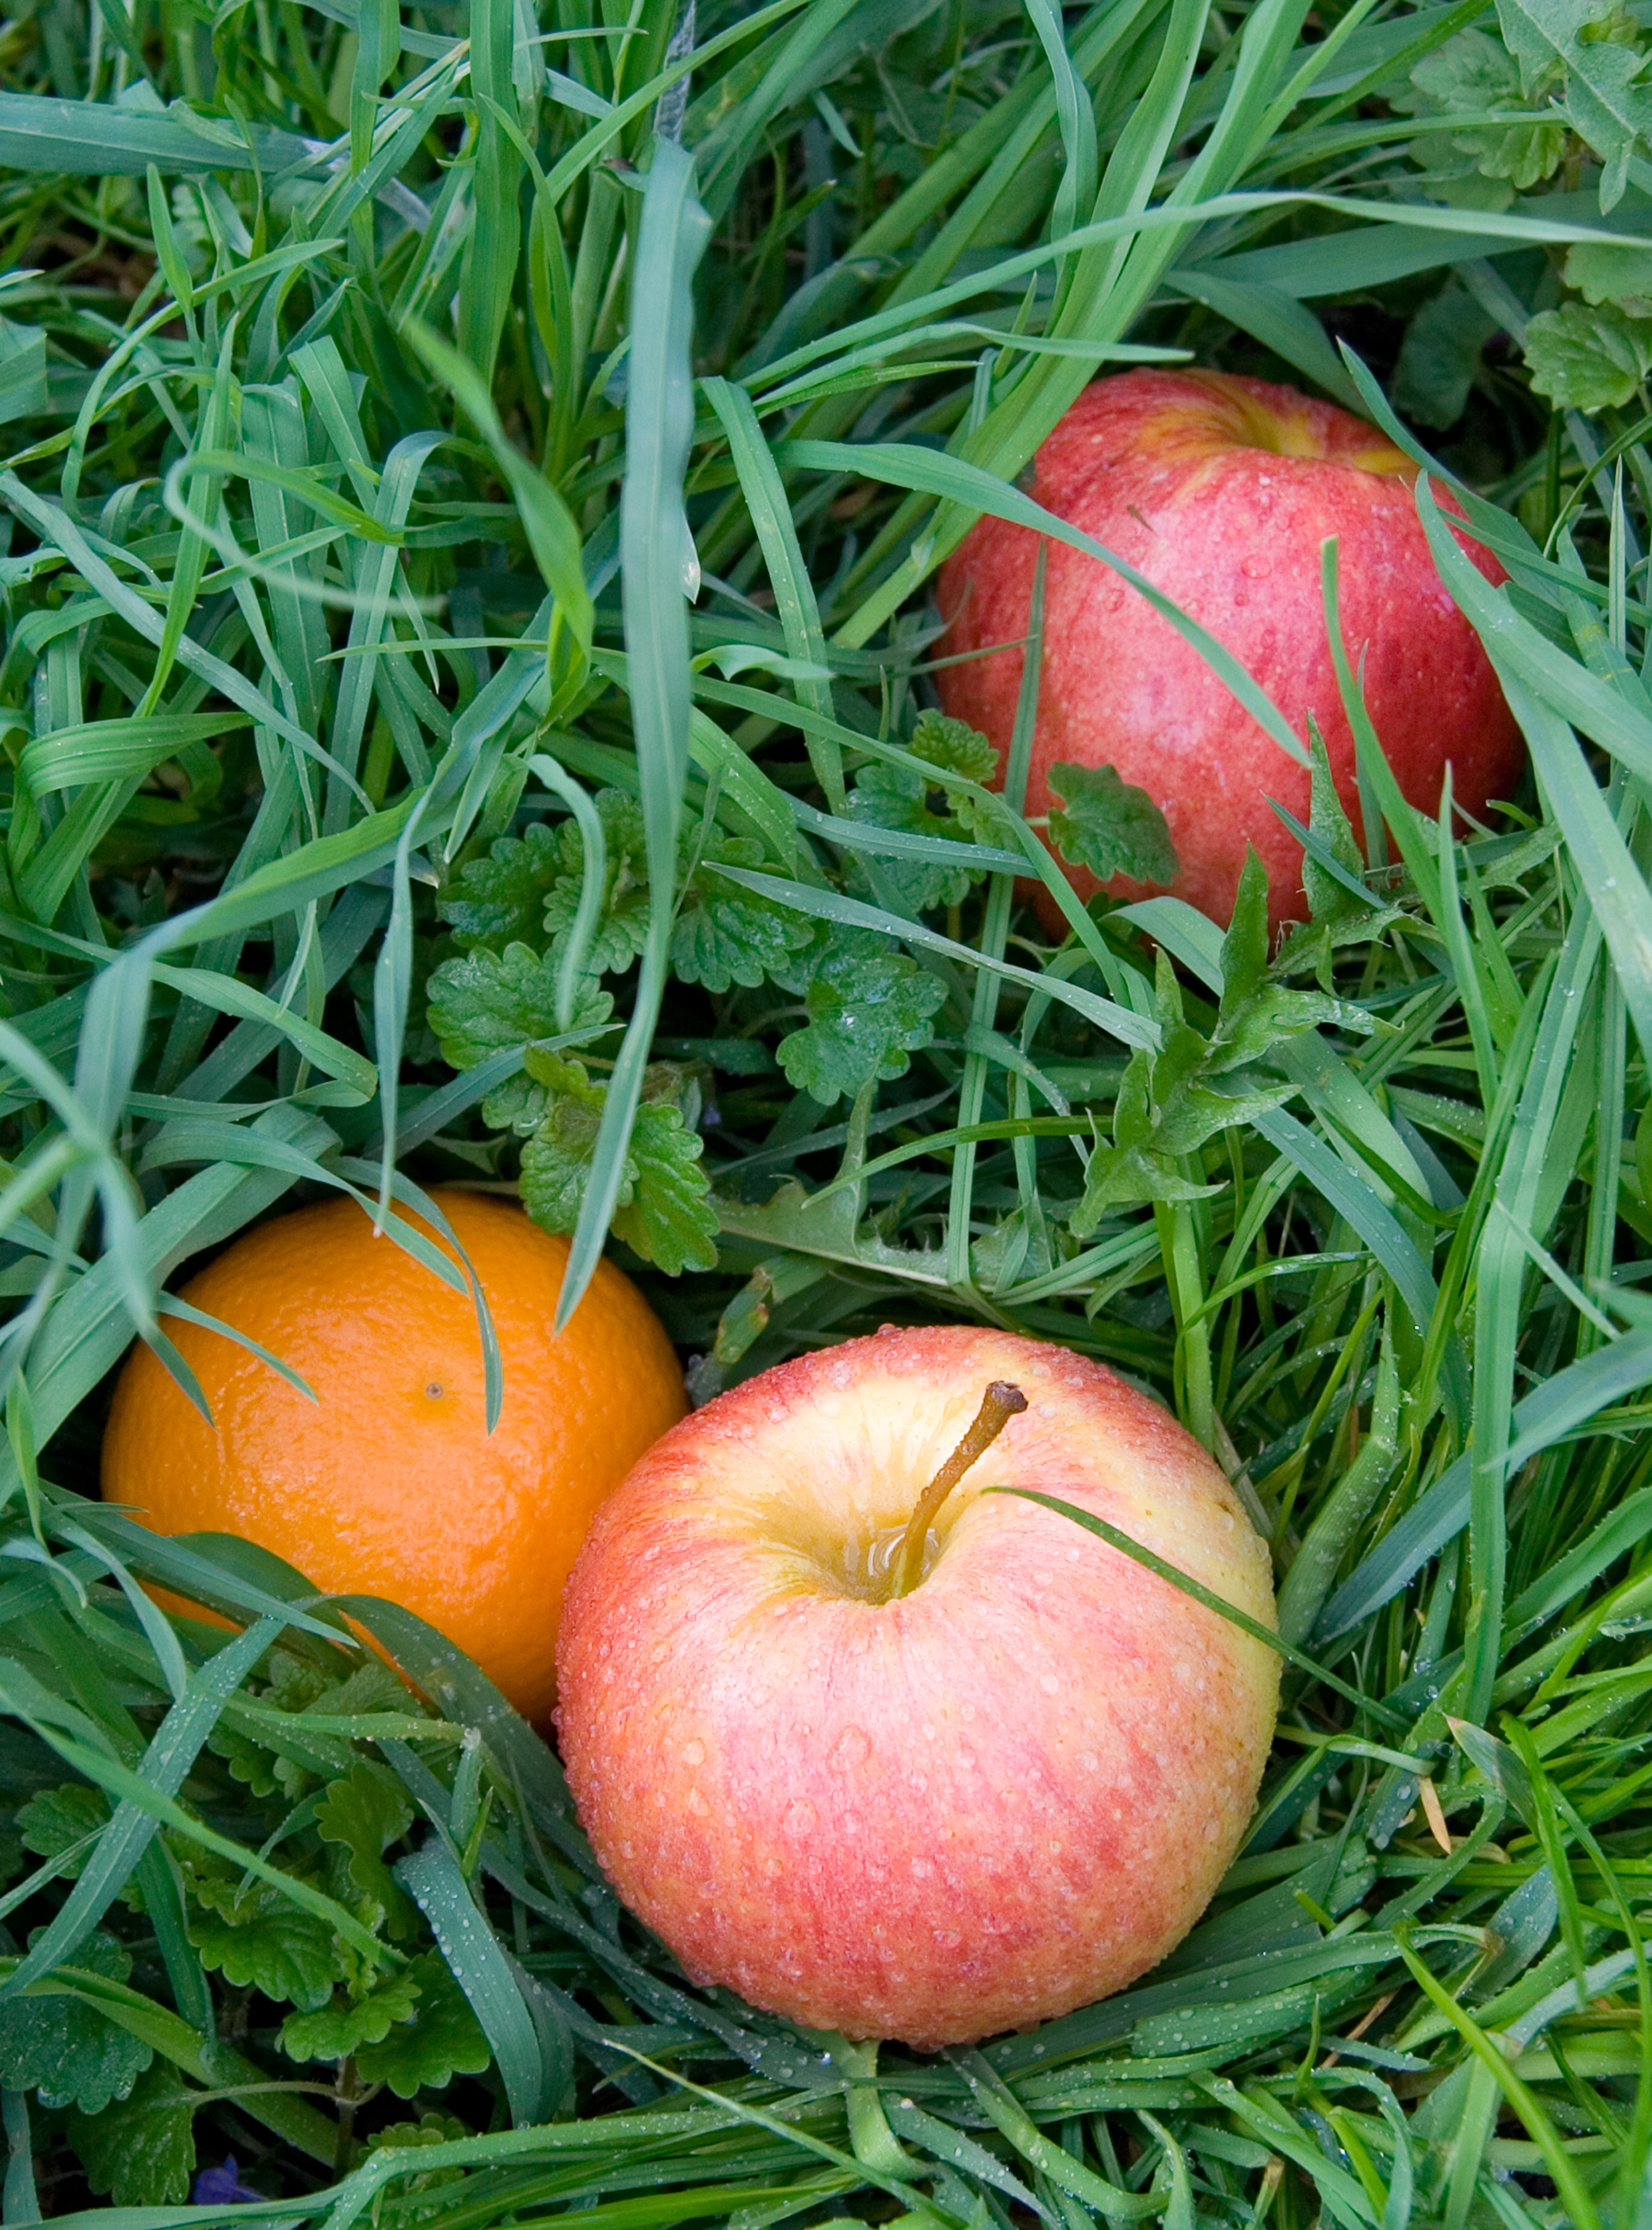 Apples and an orange in the grass